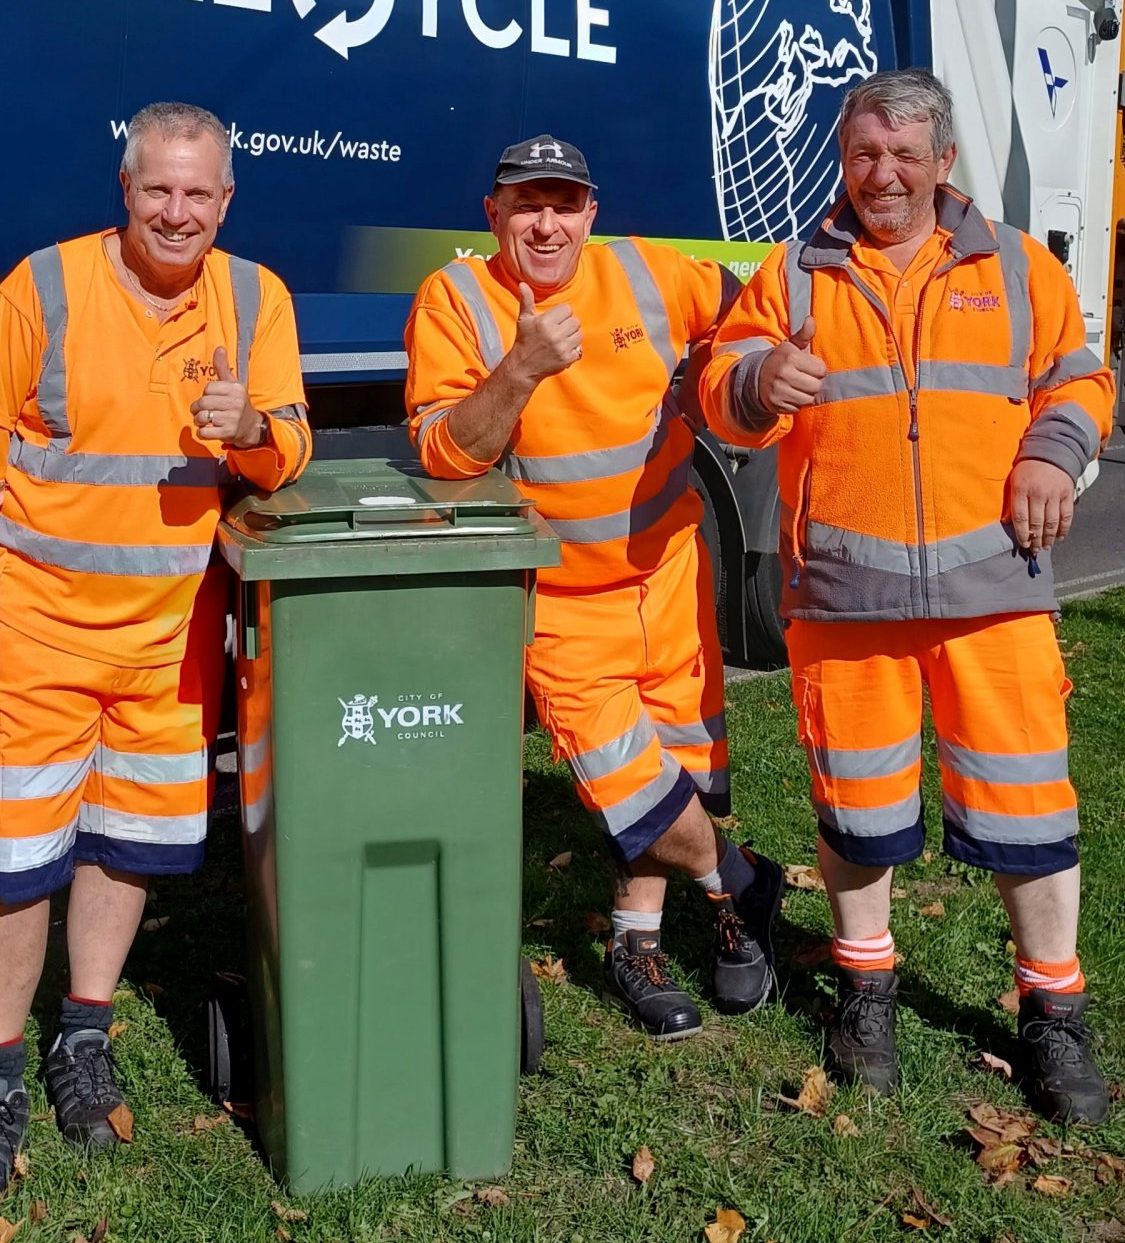 Hi vis kilt binman ‘wins battle with bosses’ and can wear shorts on rounds